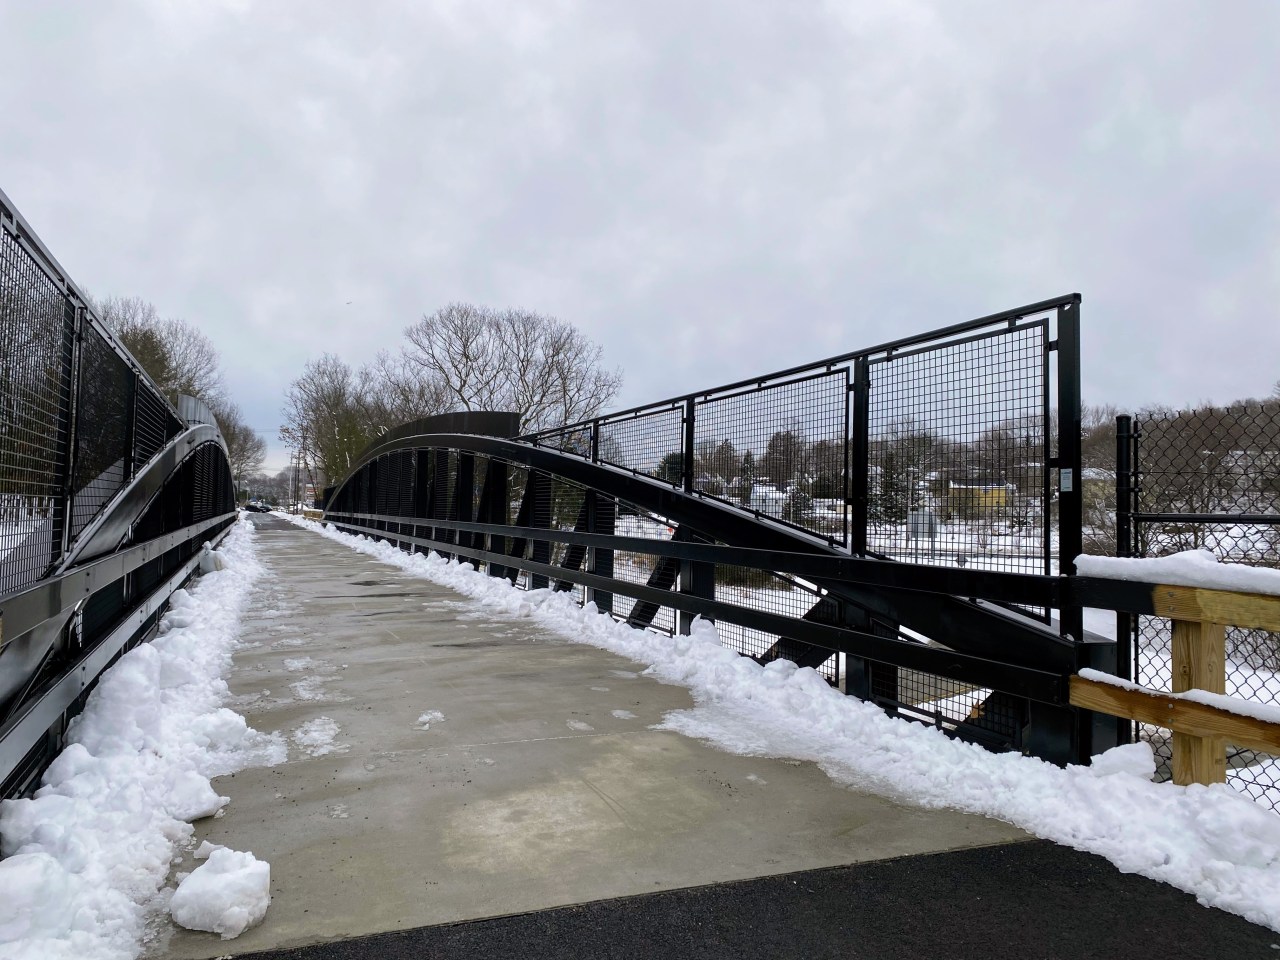 A mostly snow-cleared bridge with black metal guards to prevent people from falling.